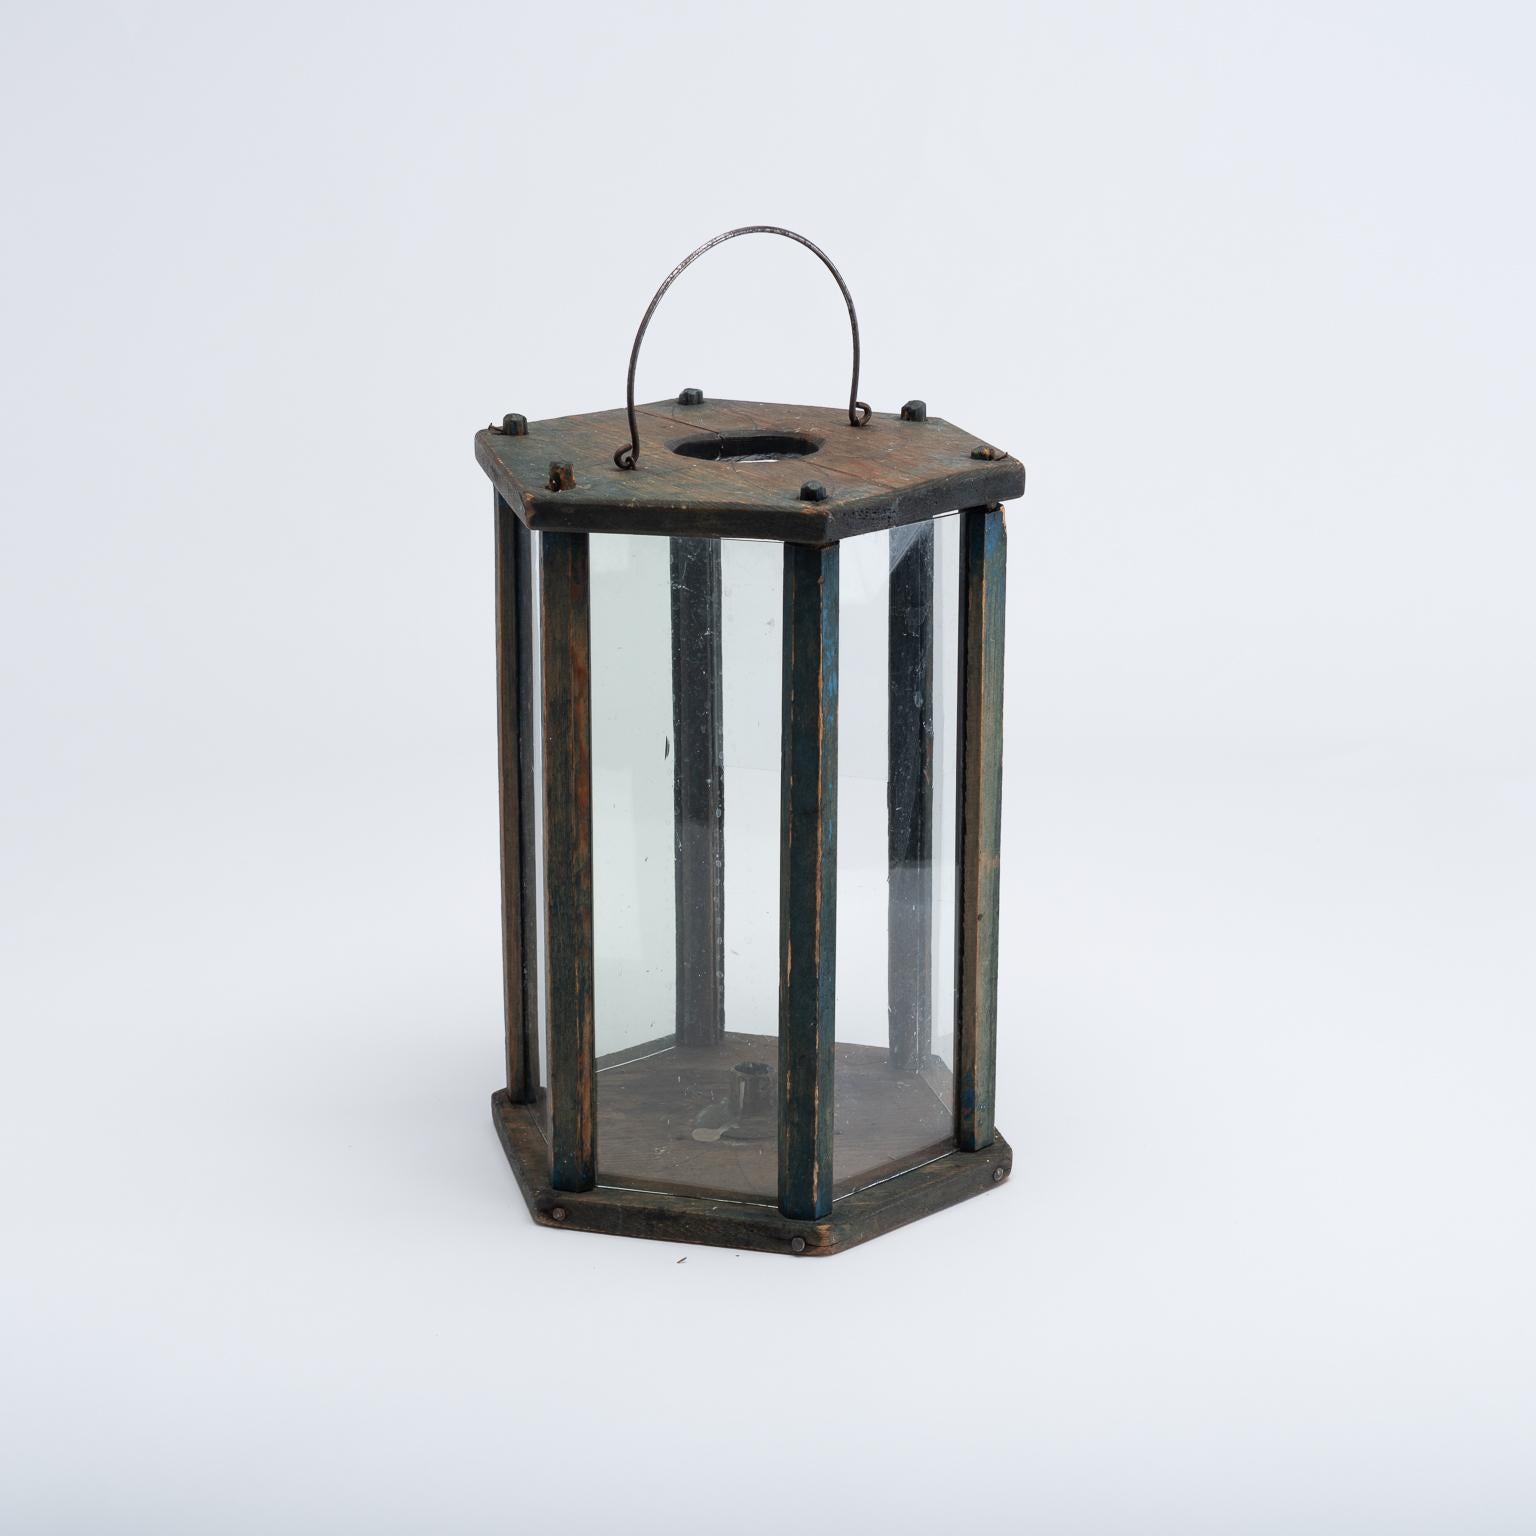 Folk Art lantern manufactured from Swedish pine. The blue paint is original. The lantern has wooden decorations on the top as well as six glass panels covering the sides. There is a candleholder in brass at the bottom of the lantern with room for